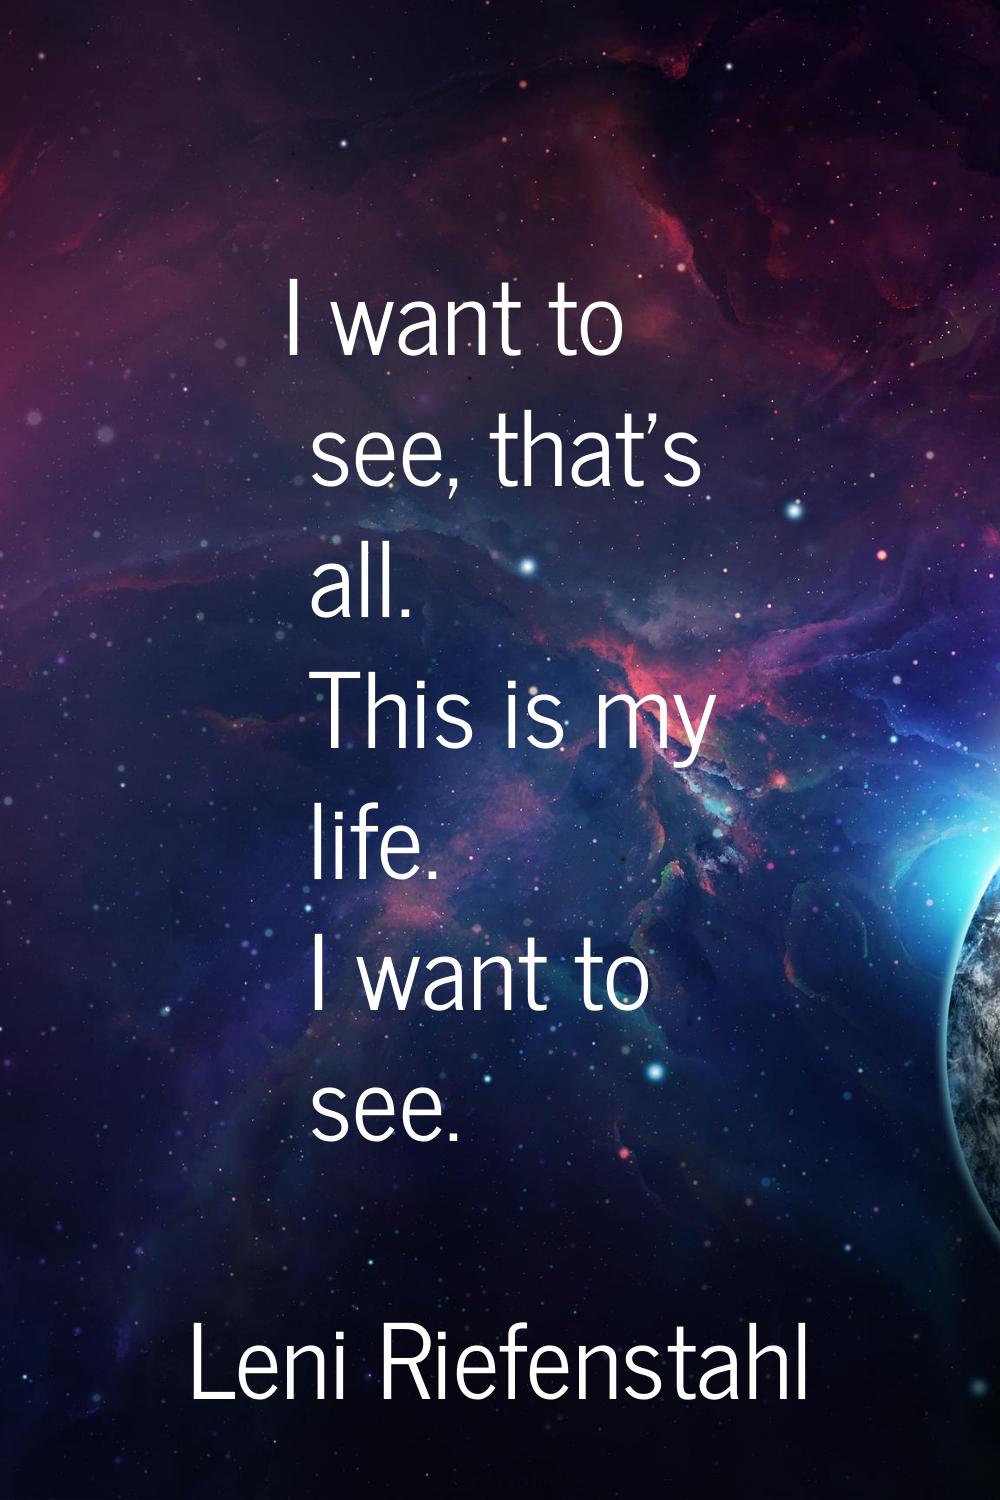 I want to see, that's all. This is my life. I want to see.